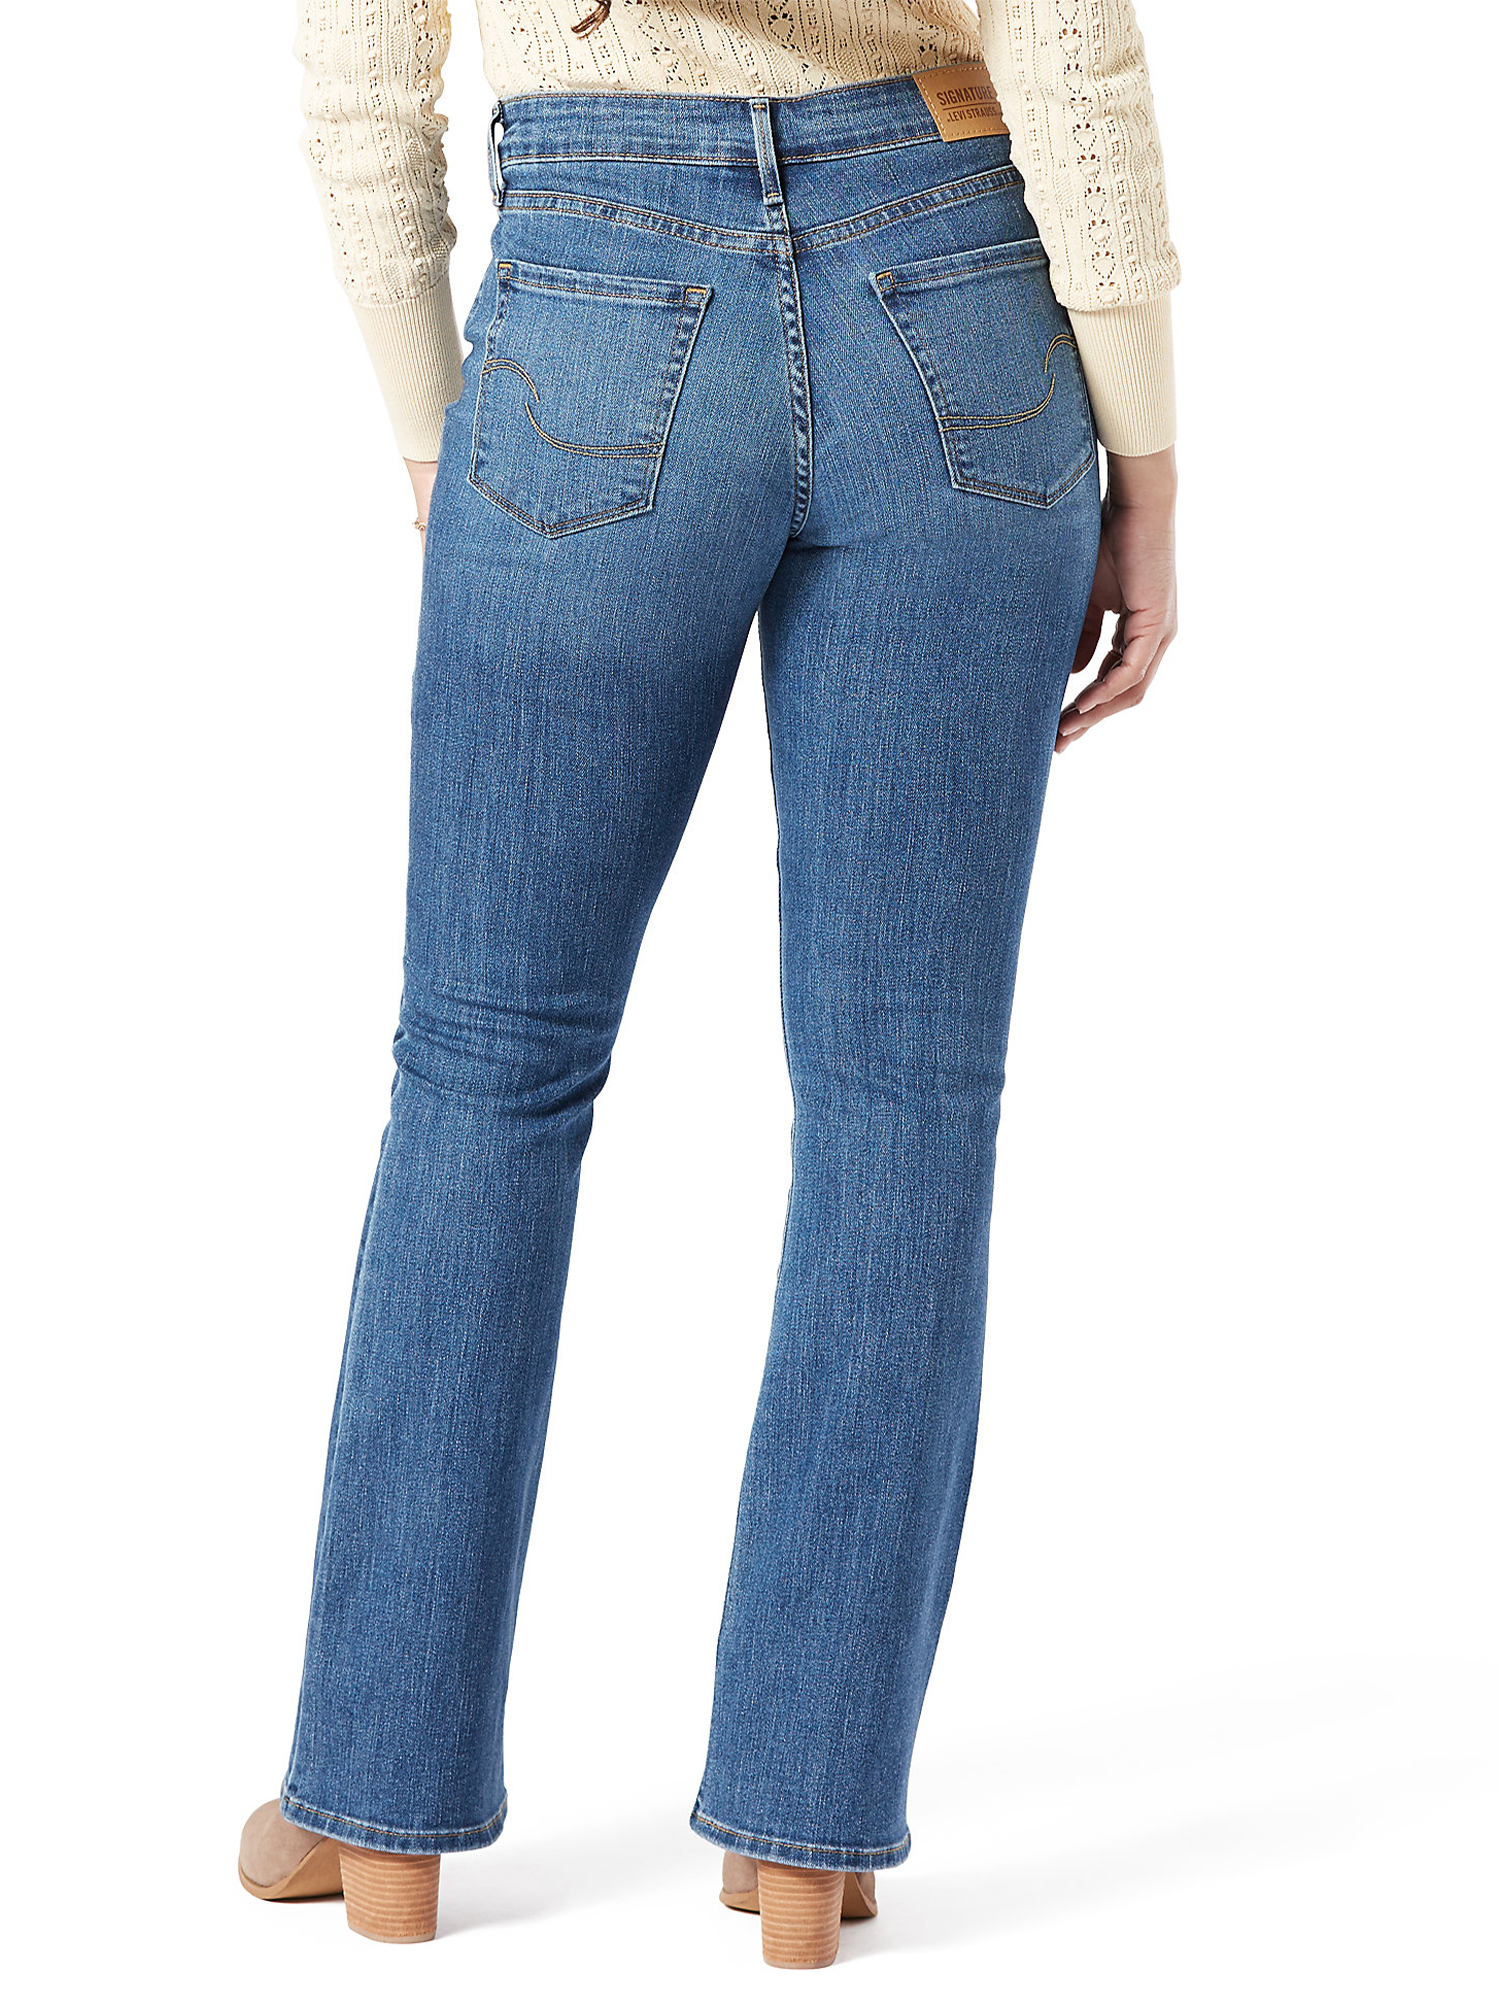 Signature by Levi Strauss & Co. Women's and Women's Plus Modern Bootcut Jeans - image 5 of 7